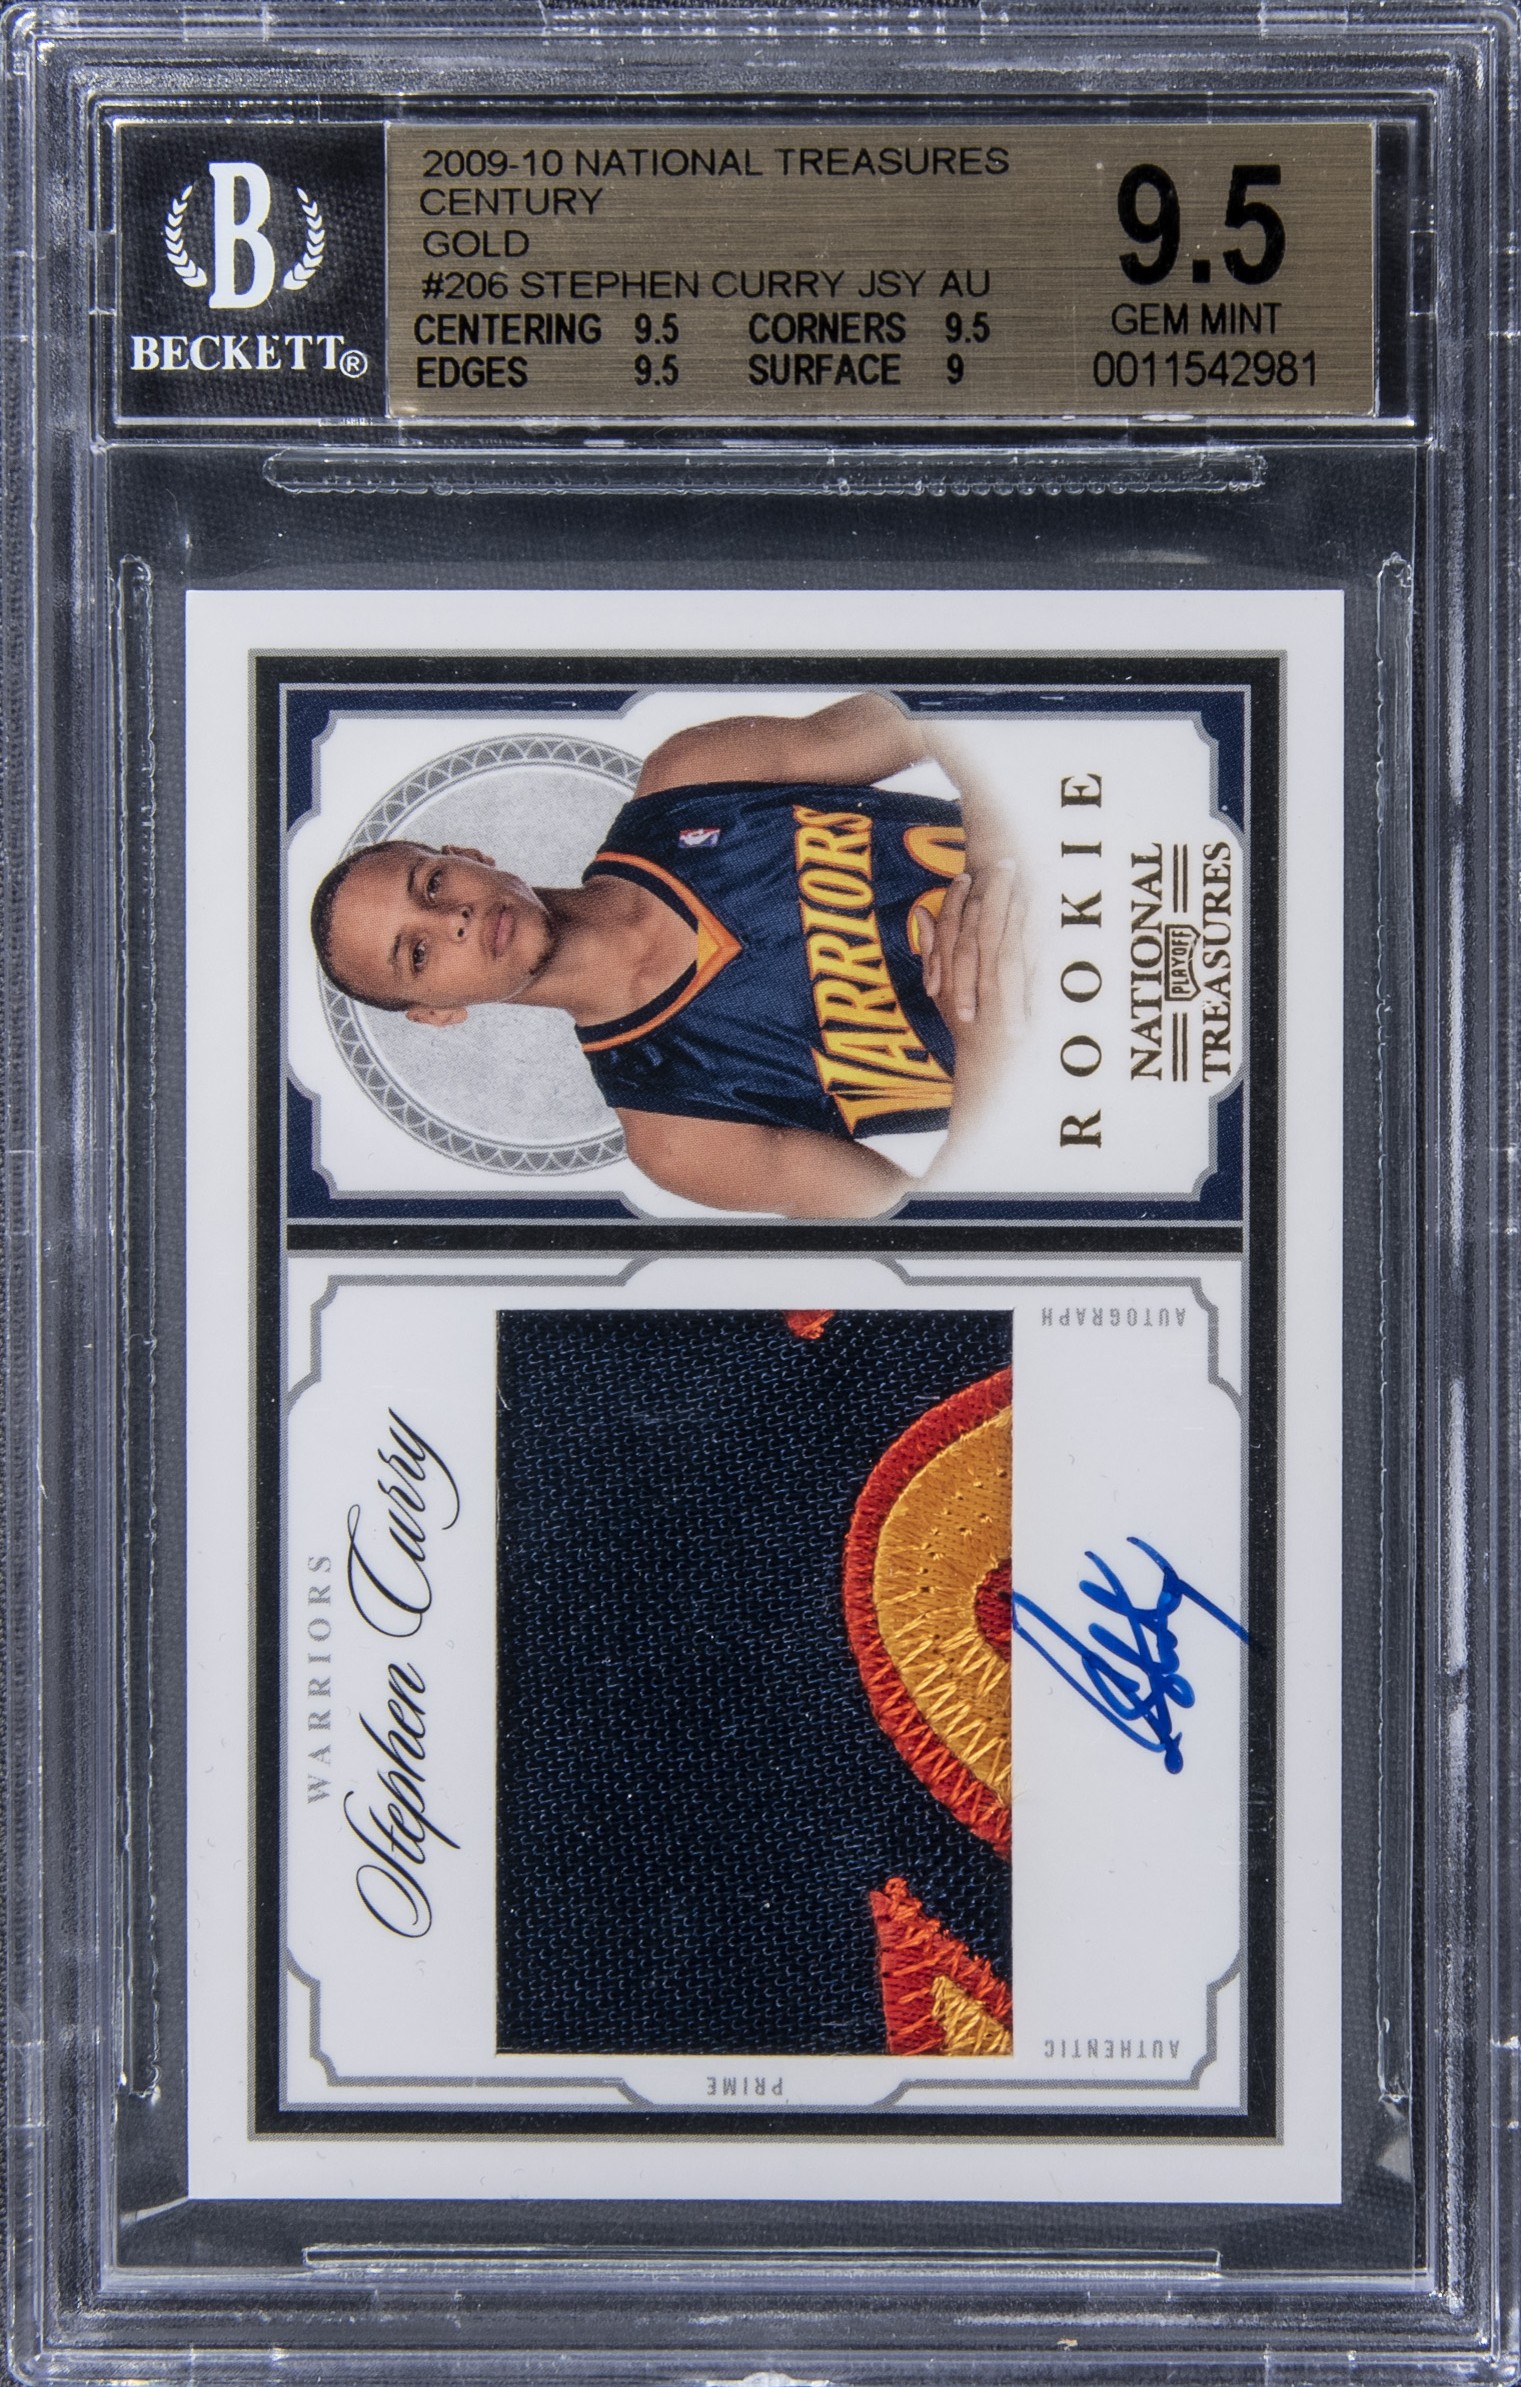 2009-10 Panini National Treasures Rookie Patch Autograph (RPA) Century Gold #206 Stephen Curry Signed Patch Rookie Card (#18/25) - BGS GEM MINT 9.5